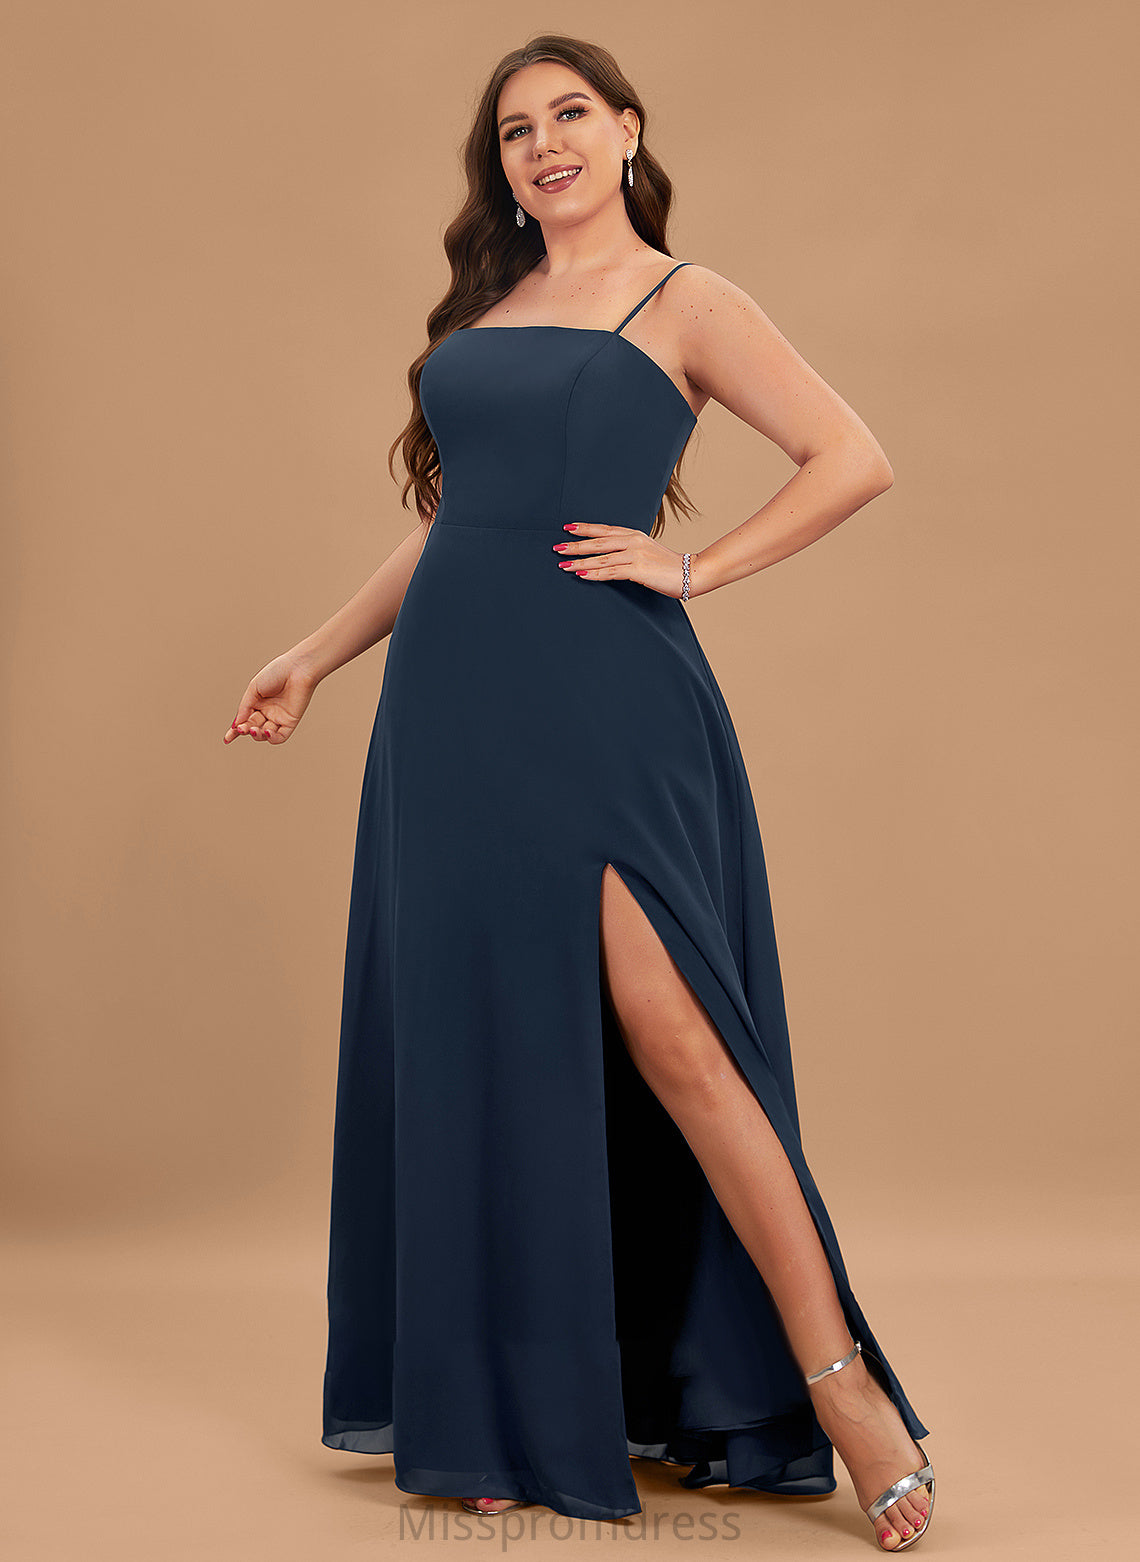 Square Neckline A-Line With Front Floor-Length Split Prom Dresses Chiffon Tricia